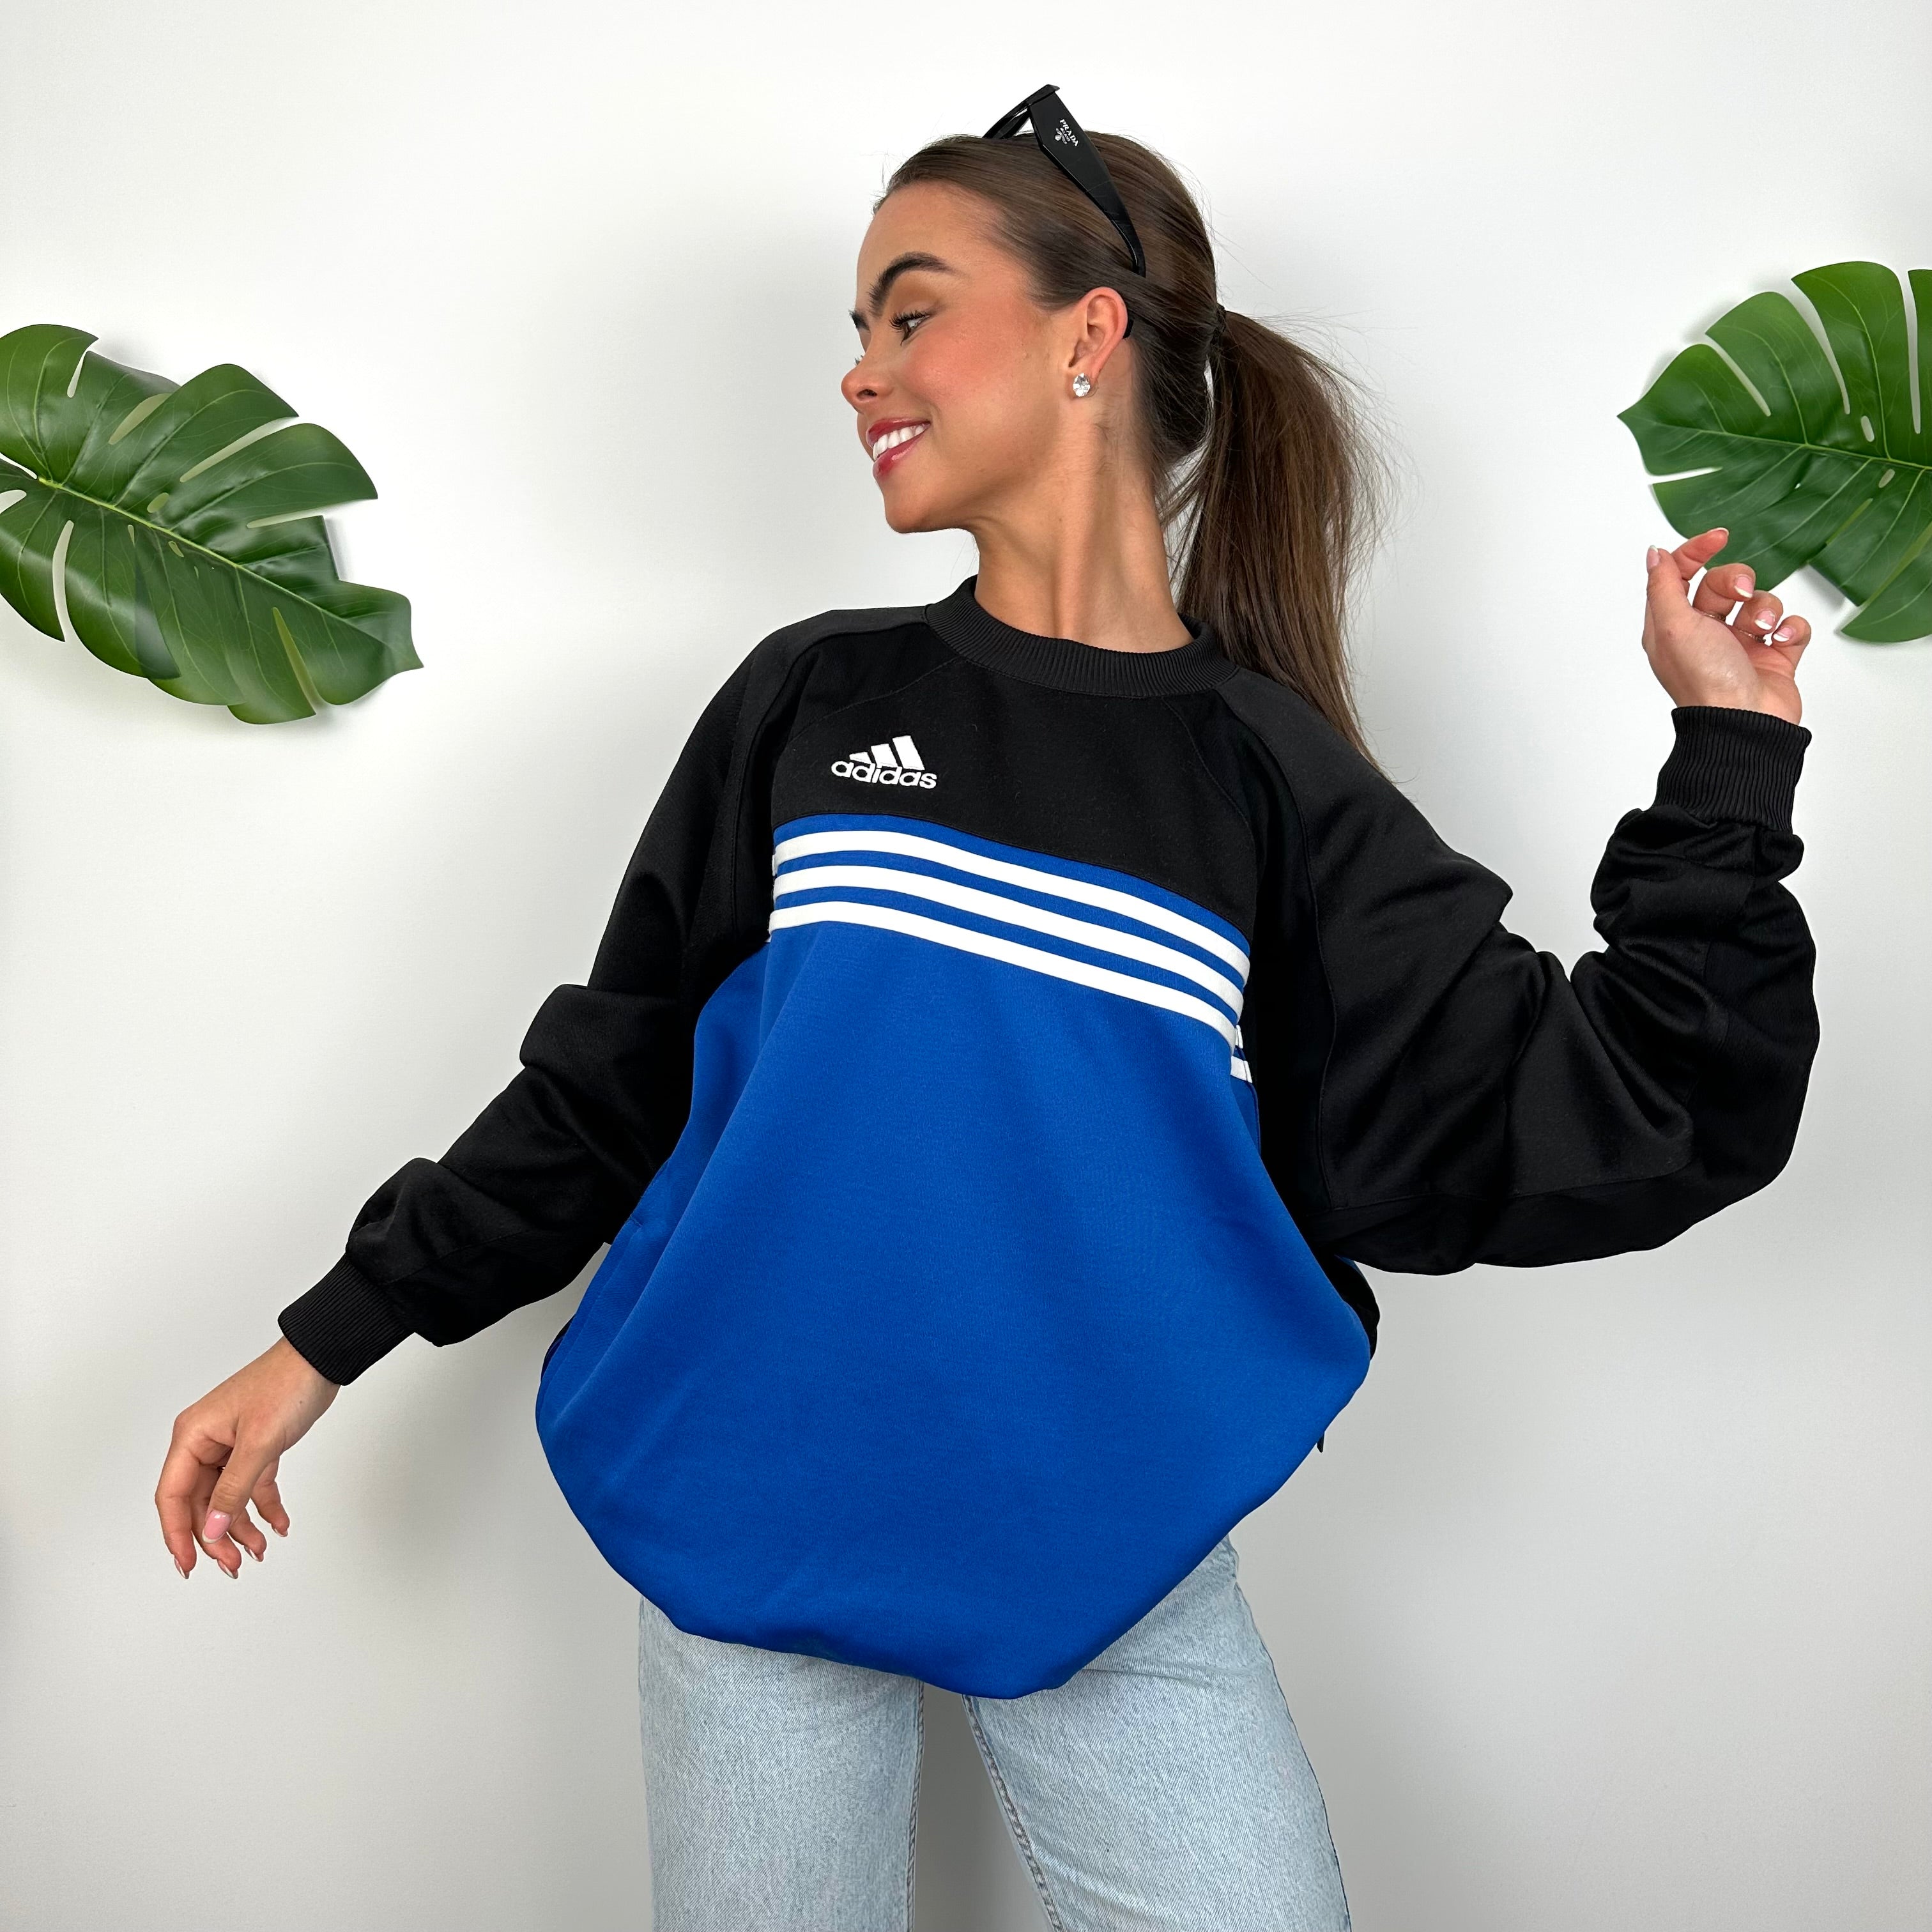 Adidas Black & Blue Embroidered Spell Out Sweatshirt (L)